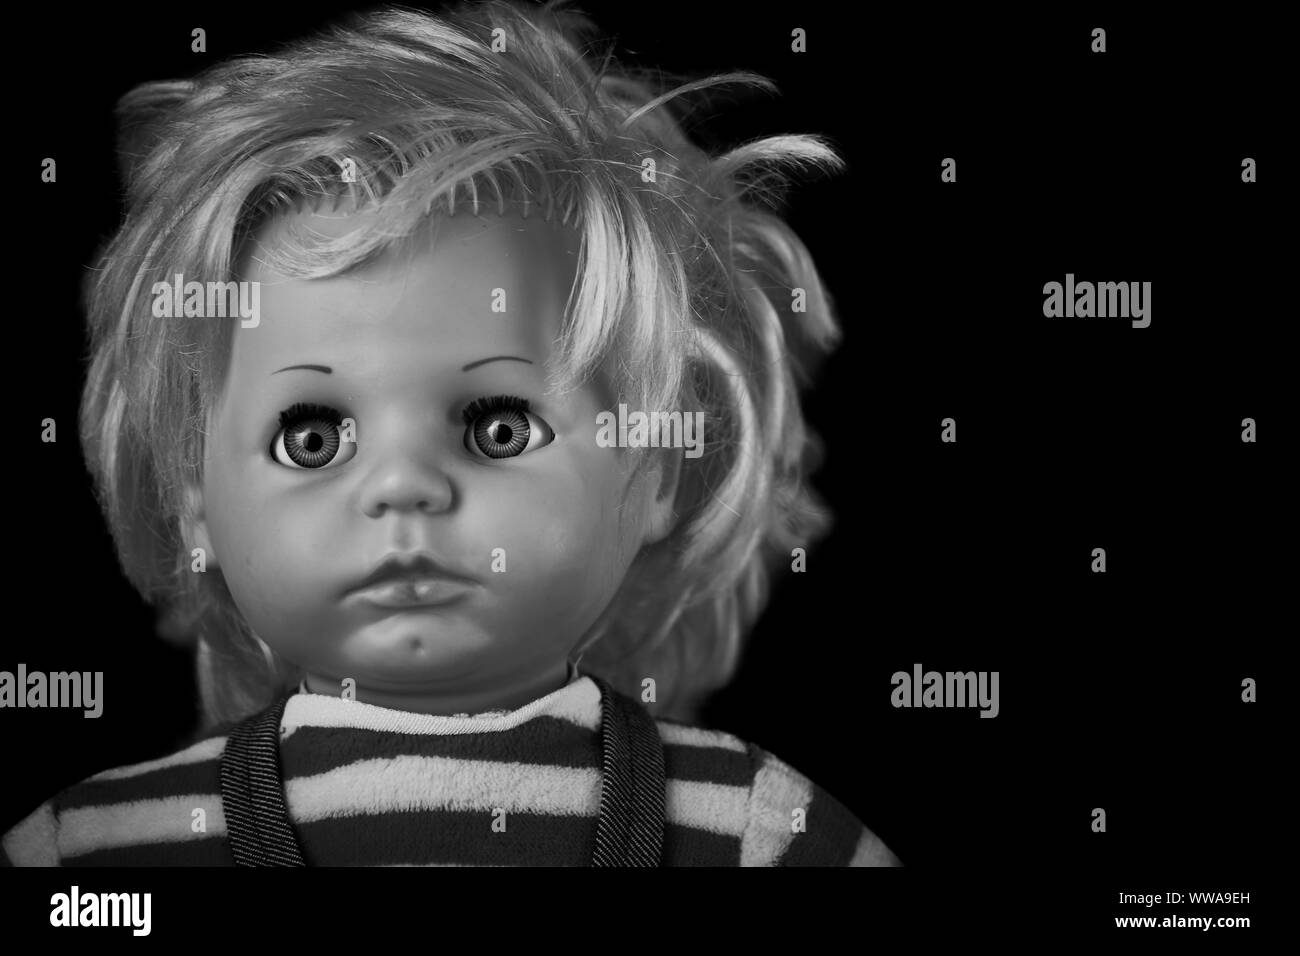 Creepy doll's head in black and white. A scary face of a weird vintage doll isolated on black background Stock Photo